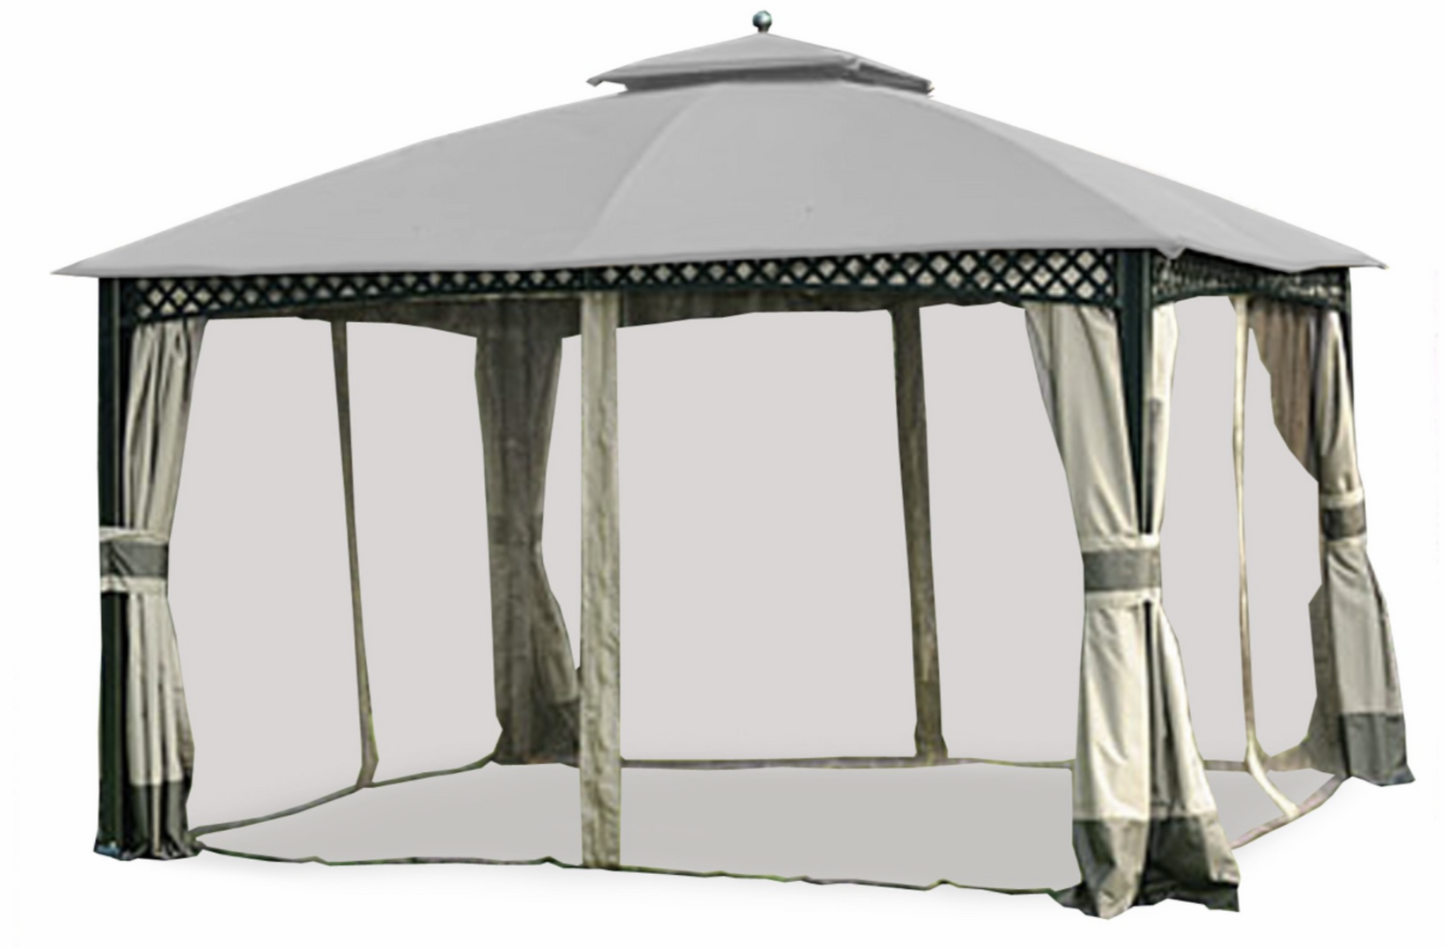 Original Replacement L-GZ842PST-D 10x12 Canopy for Sold at Big Lots Beige